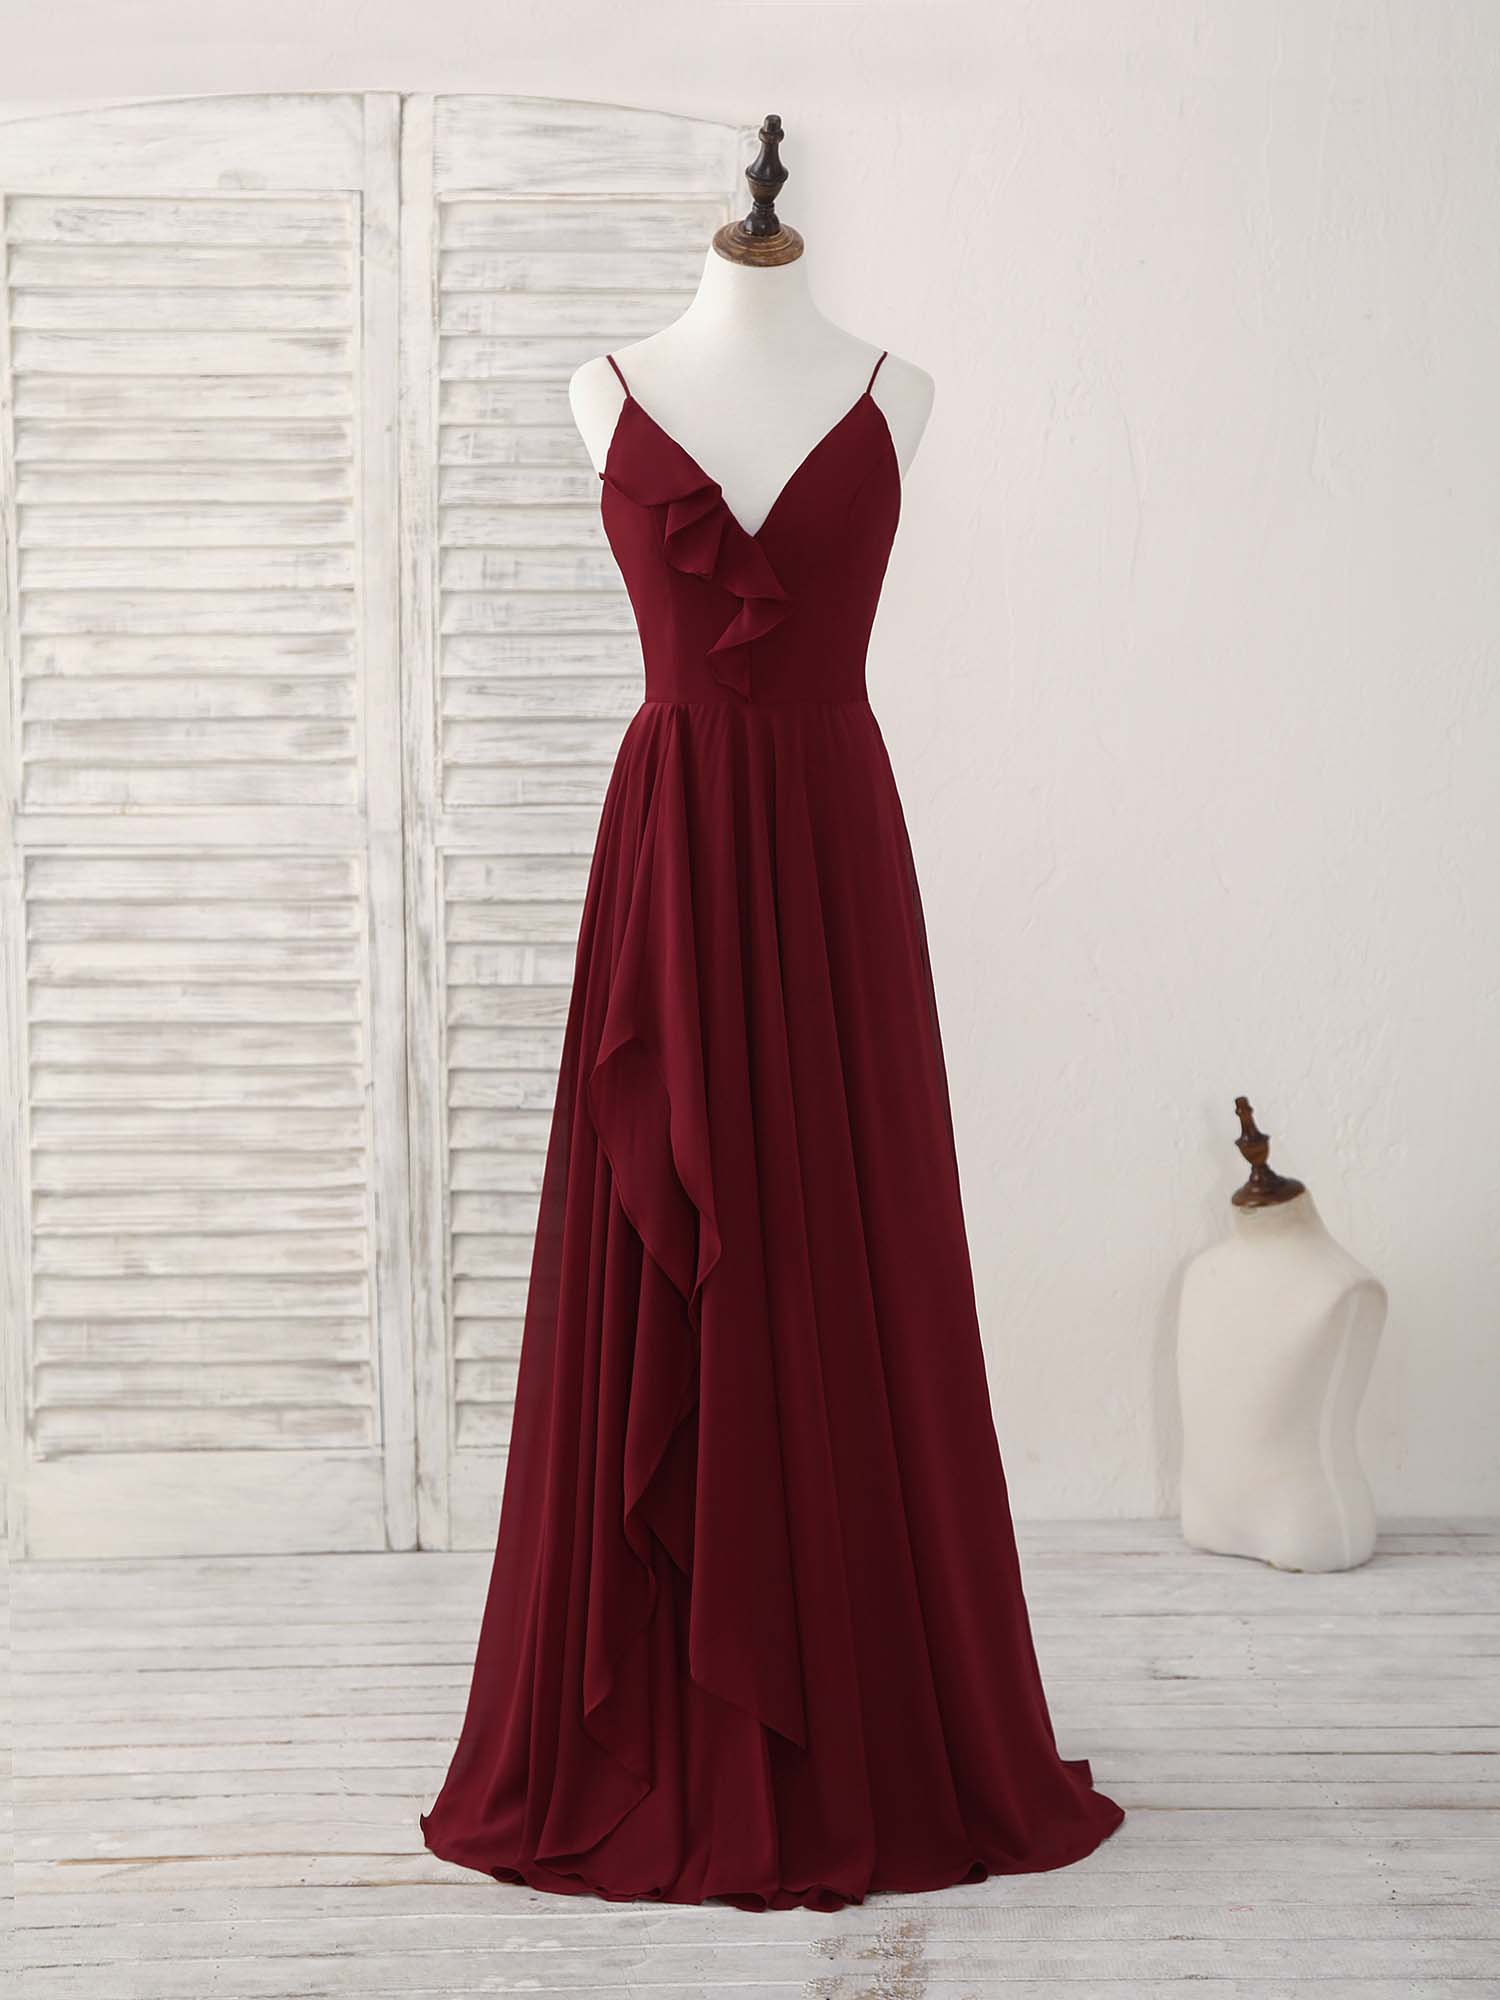 Simple Burgundy V Neck Chiffon Long Prom Dress Outfits For Girls, Bridesmaid Dress